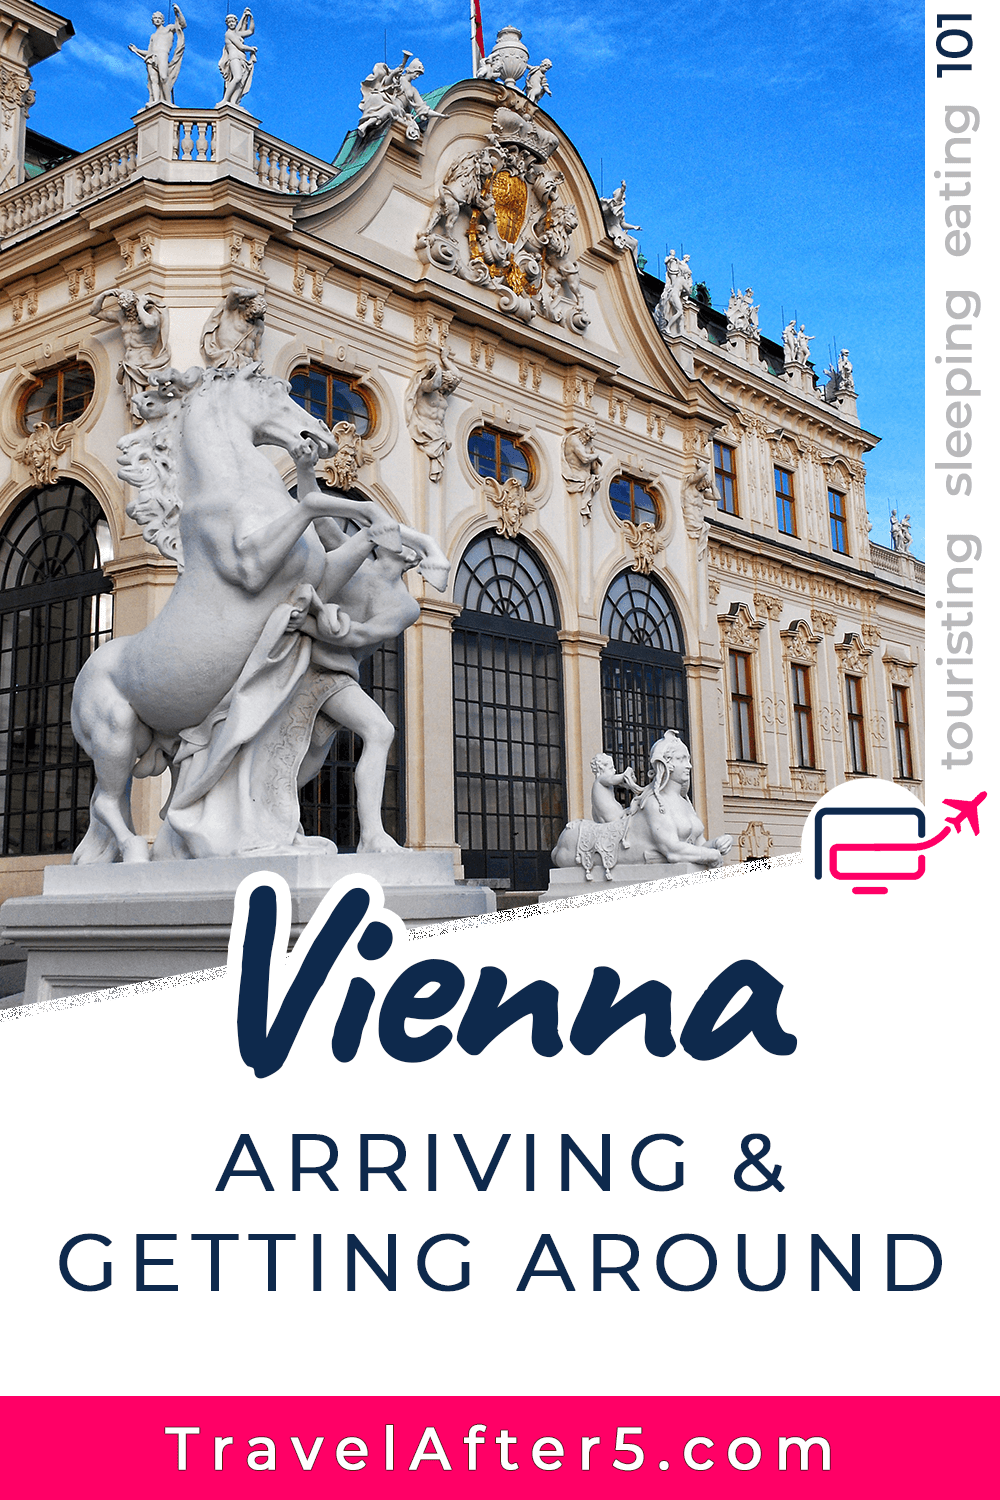 Pinterest Pin to Vienna 101, Arriving & Getting Around, by Travel After 5